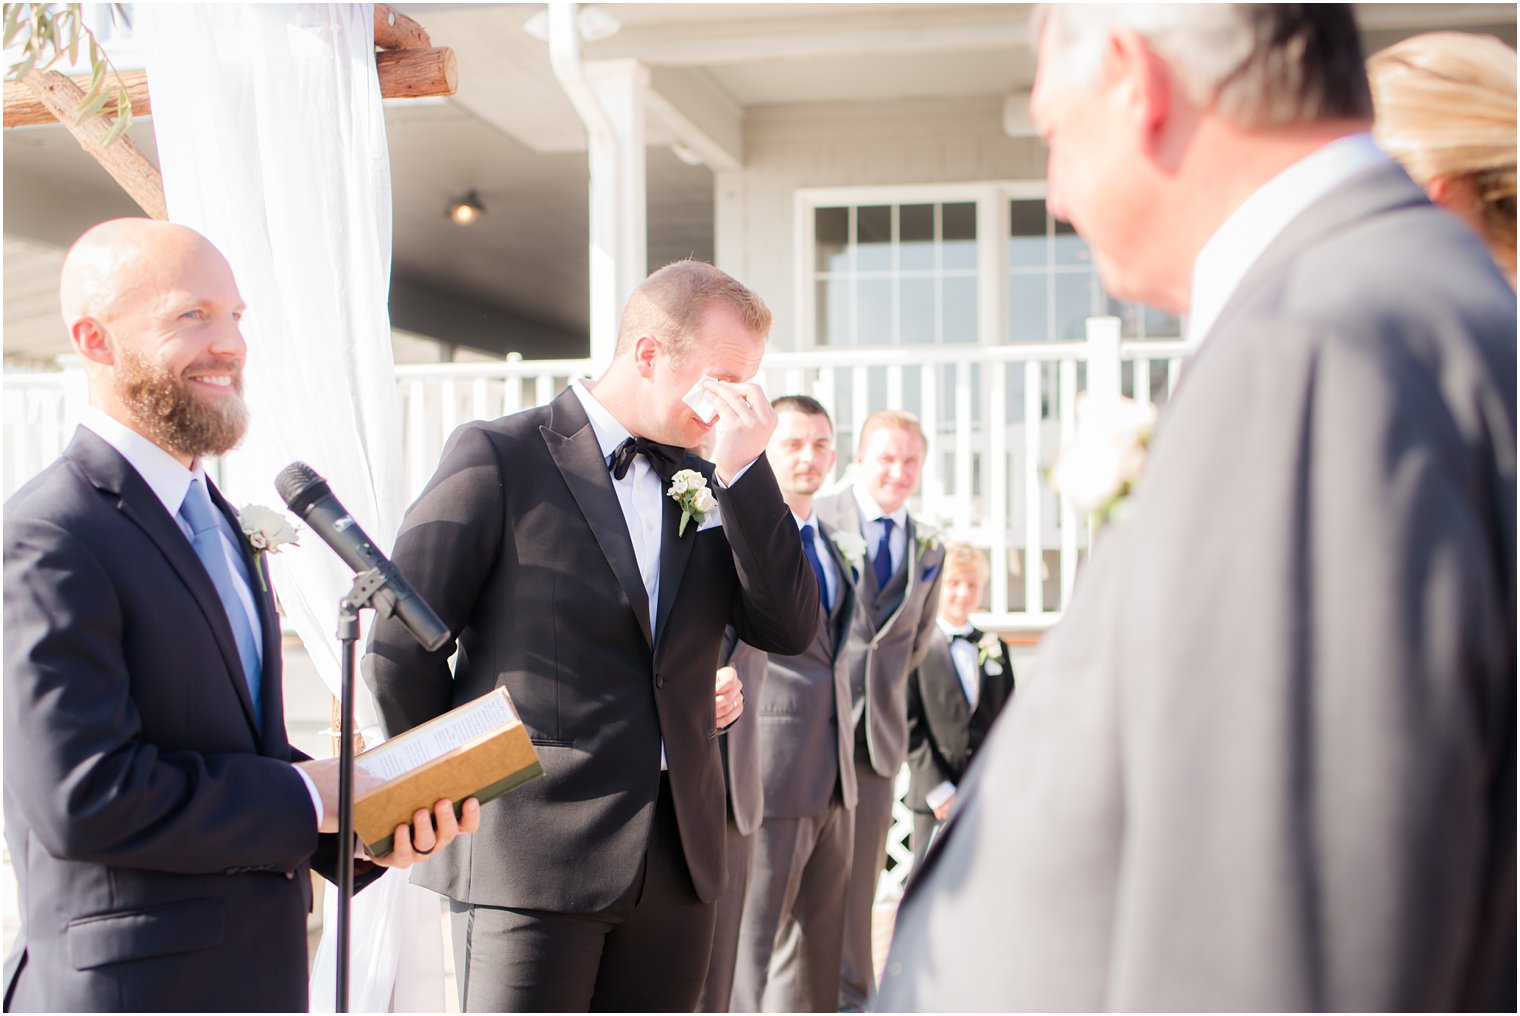 Groom crying during outdoor wedding ceremony at Brant Beach Yacht Club